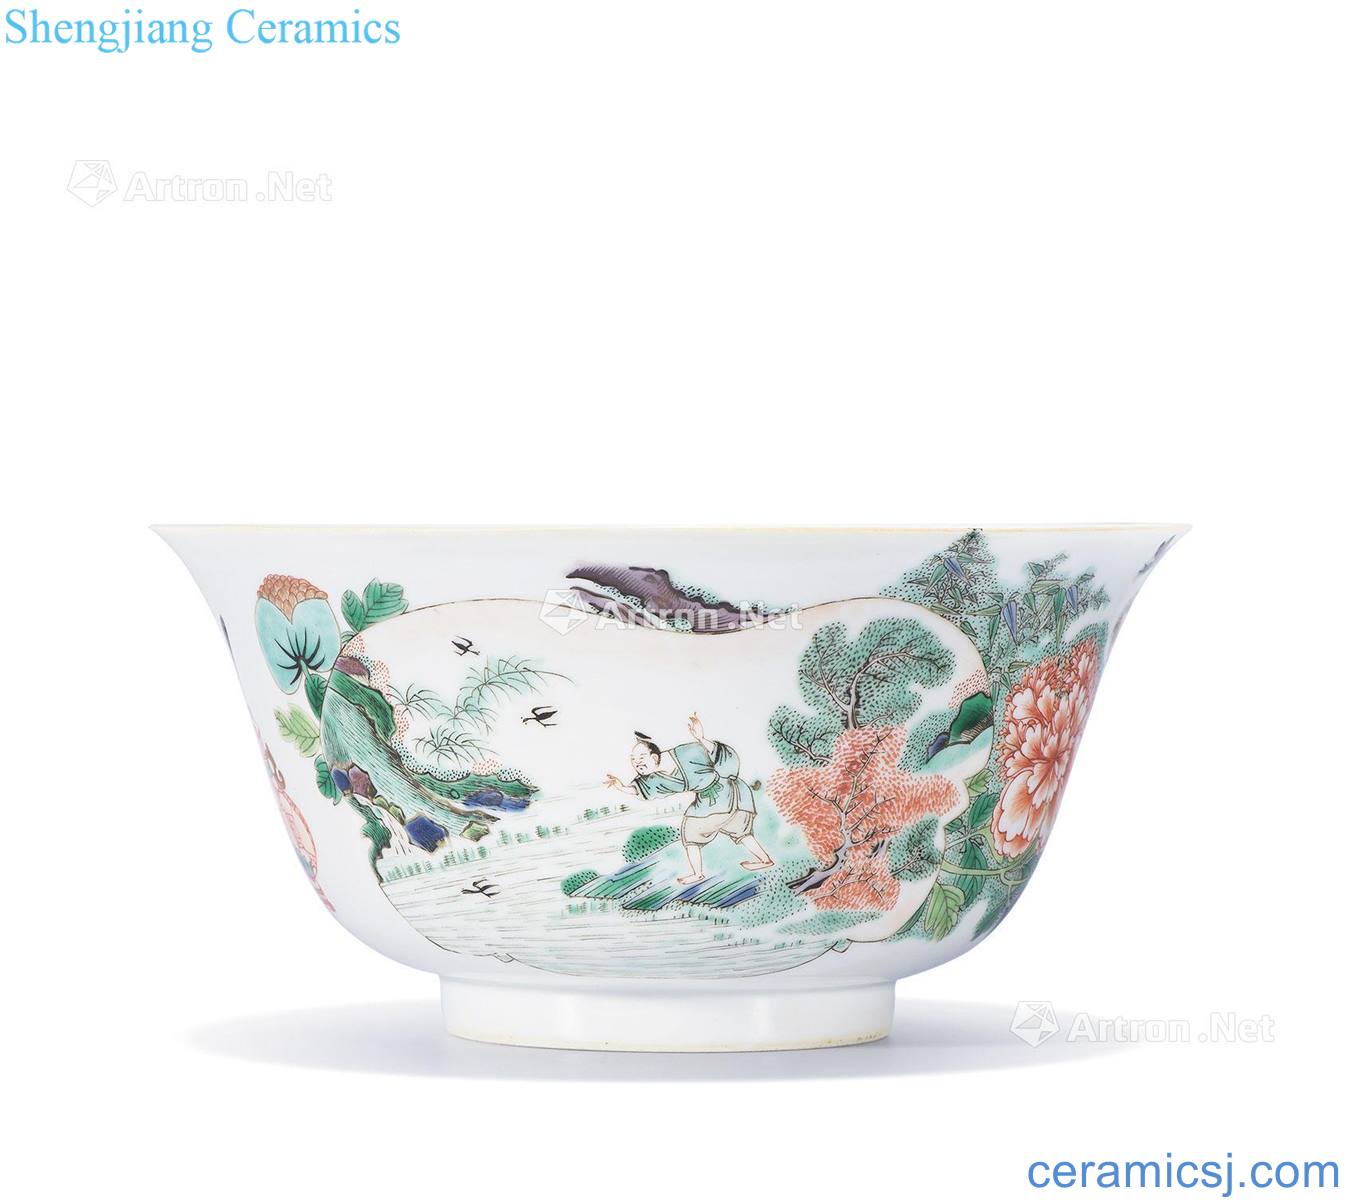 Qing poetry bowl of colorful characters